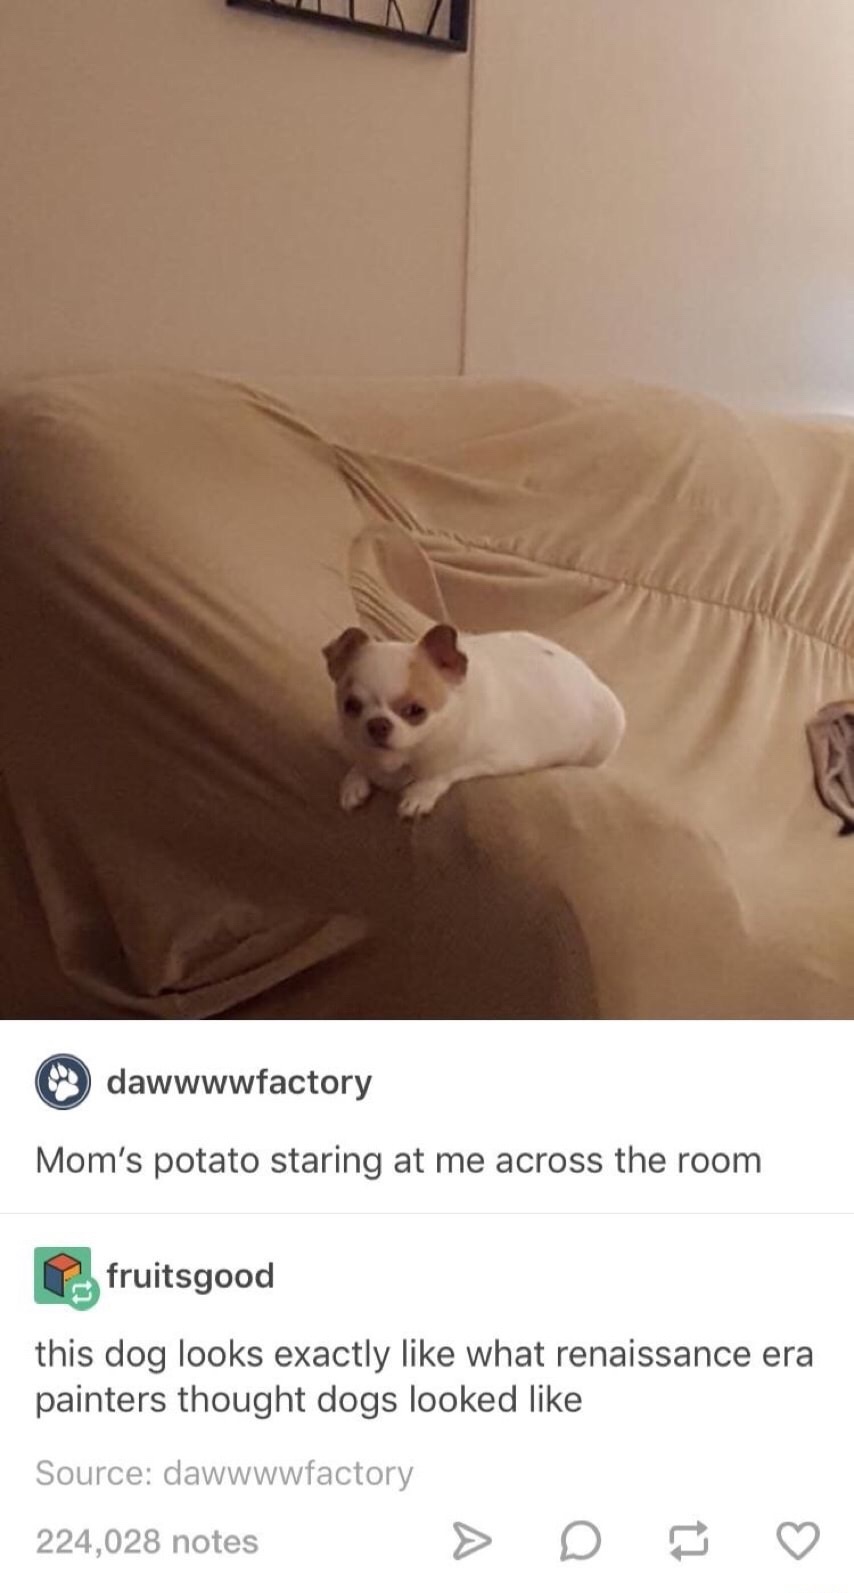 ugly renaissance dog - dawwwwfactory Mom's potato staring at me across the room fruitsgood this dog looks exactly what renaissance era painters thought dogs looked Source dawwwwfactory 224,028 notes